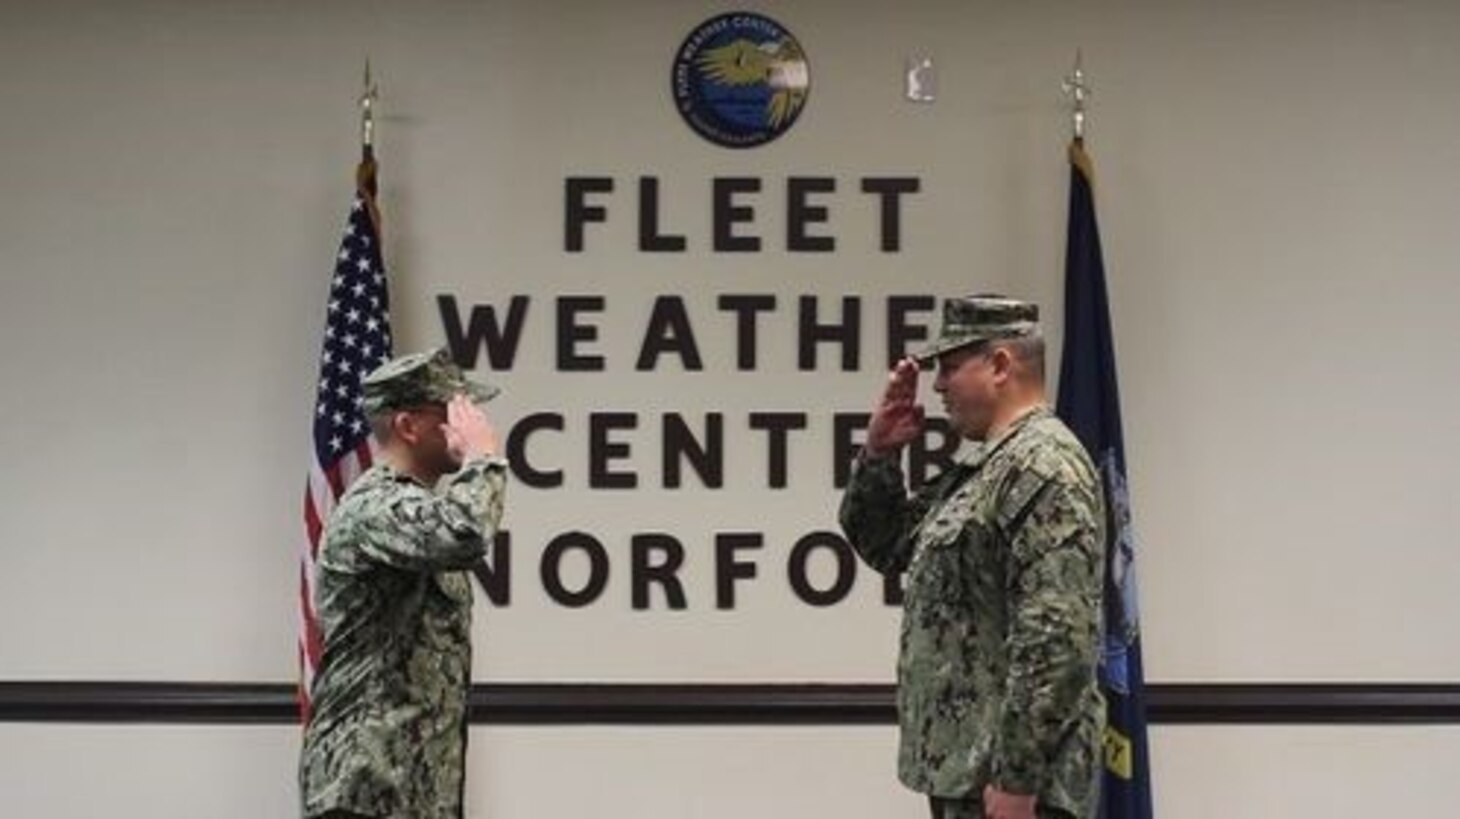 Cmdr. Matthew Cushanick, left, salutes Capt. Chris Gabriel, right, in the assumption of all duties and responsibilities as commanding officer of Strike Group Oceanography Team Norfolk during a virtual command establishment ceremony at Naval Station Norfolk, Virginia, on Oct. 1, 2020.